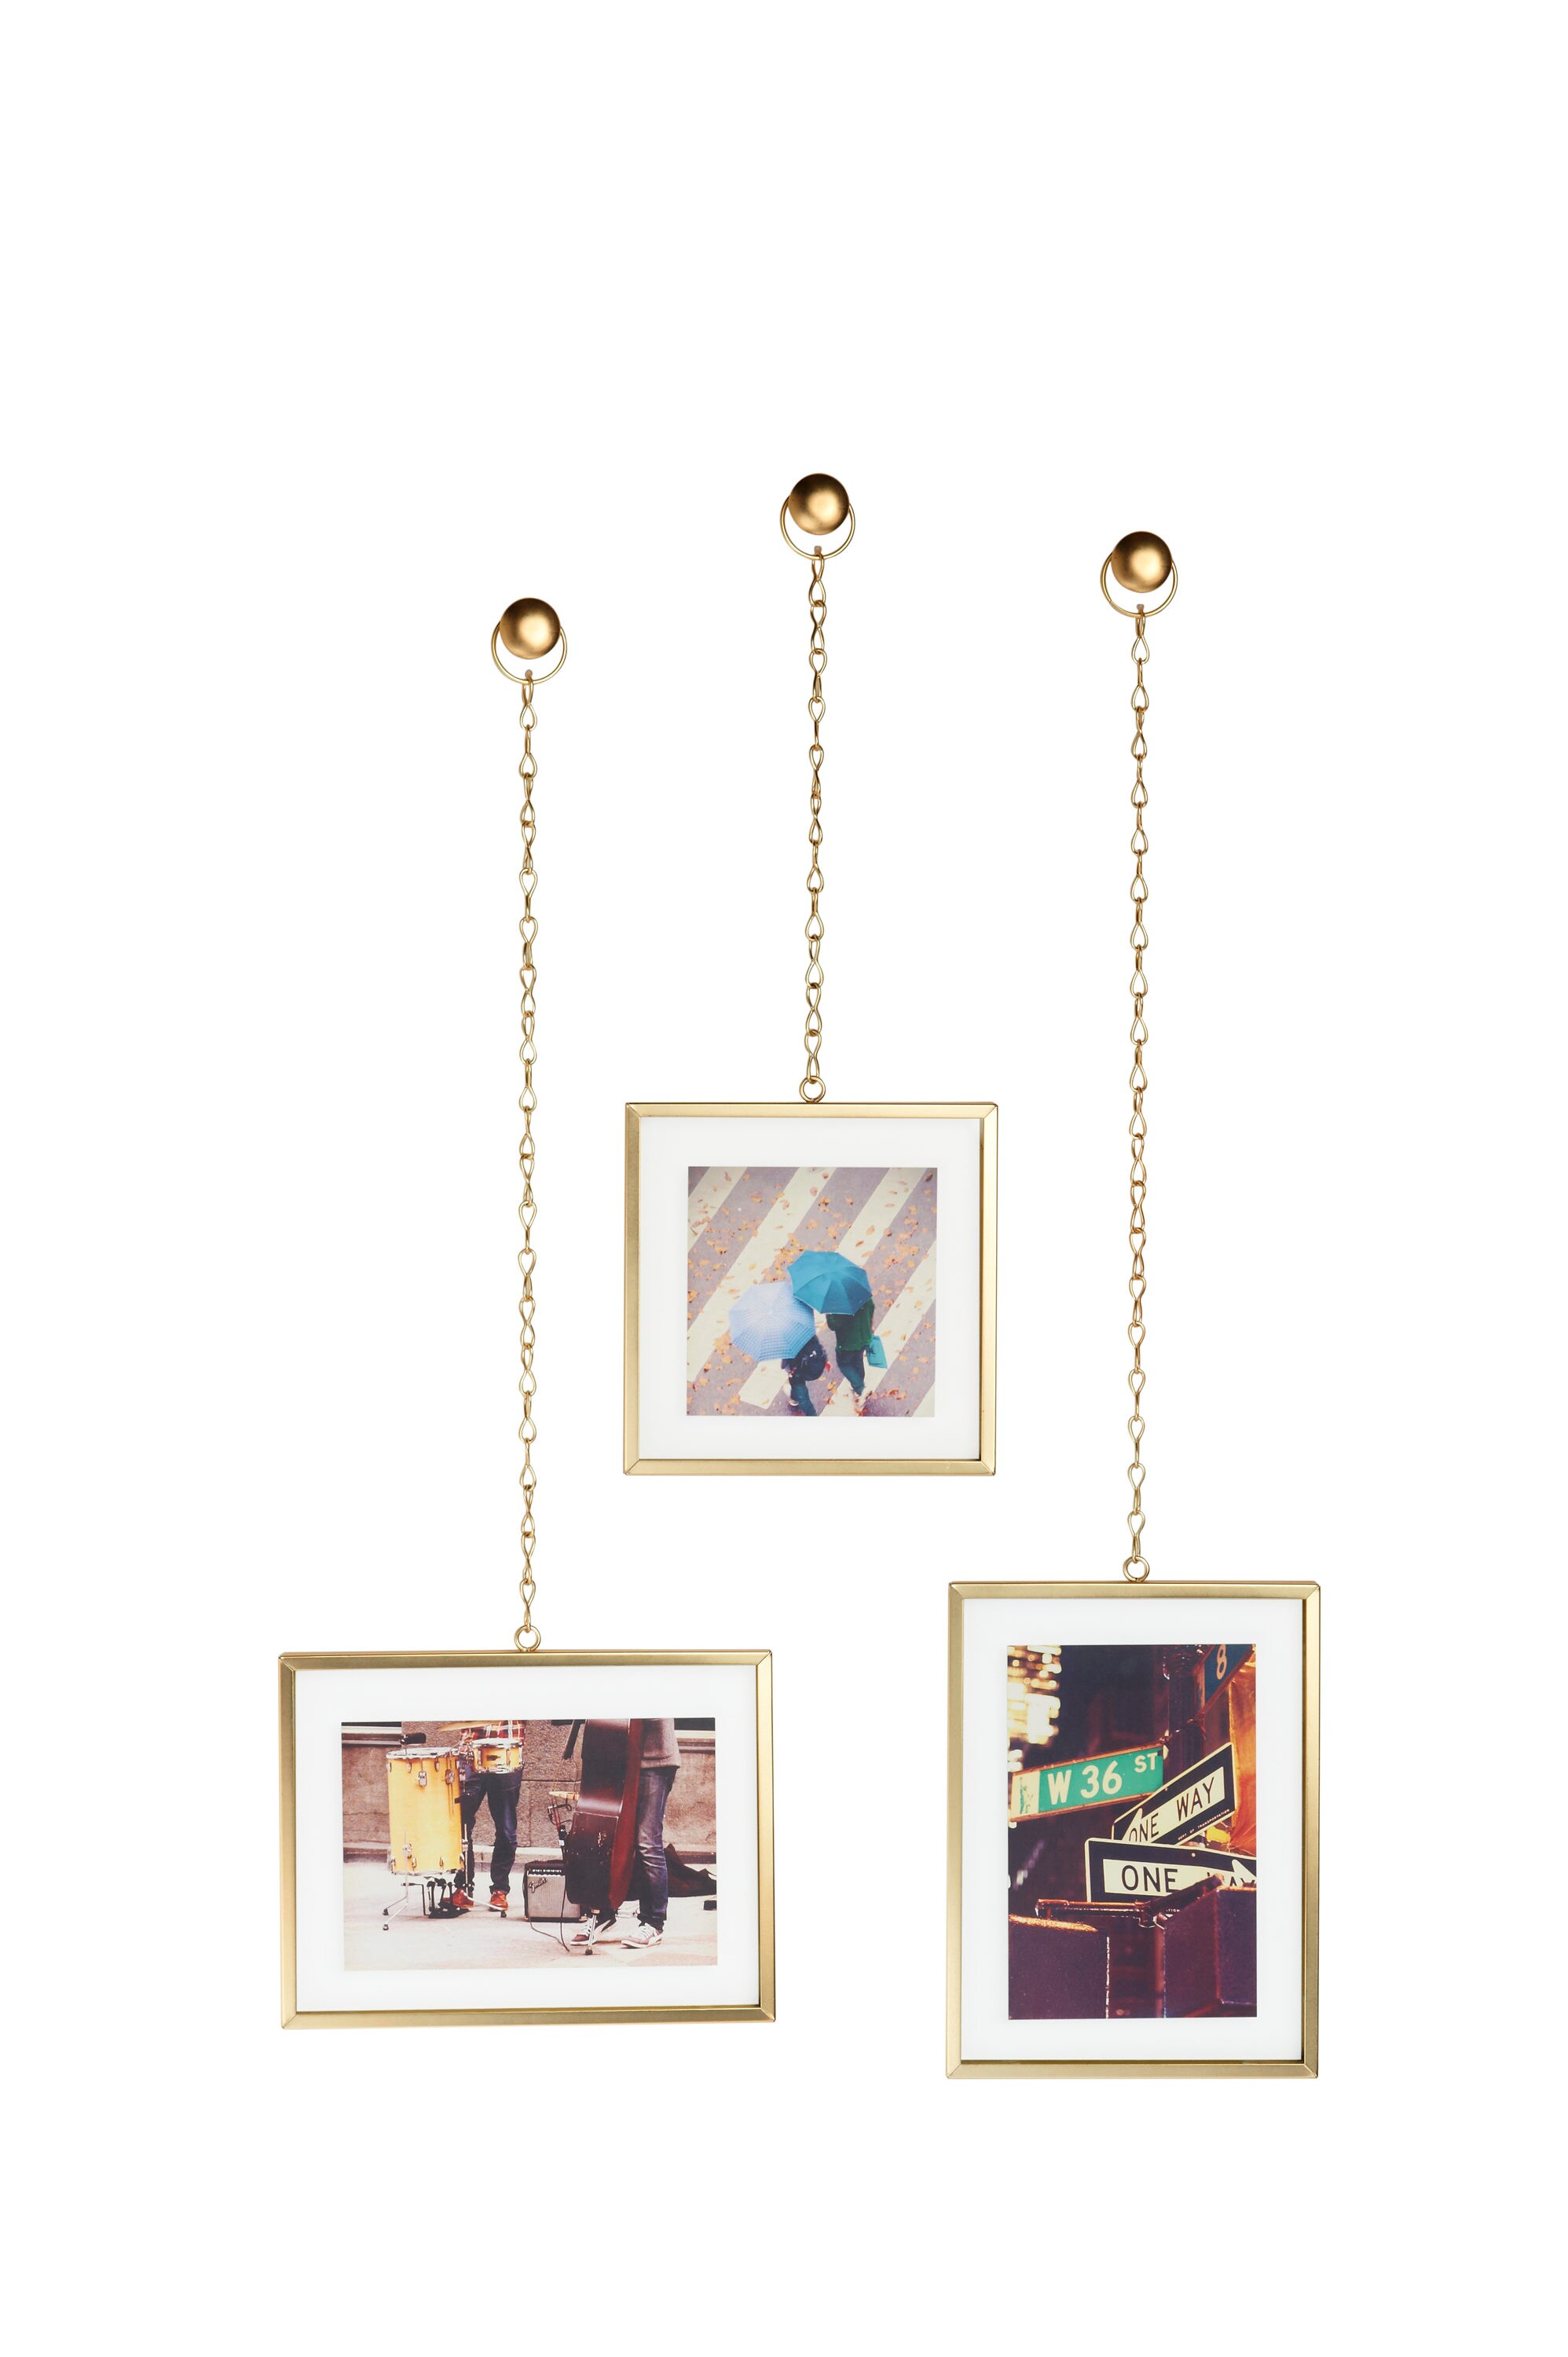 Malden 14 Bronze & Silver Matted Molding Picture Frame